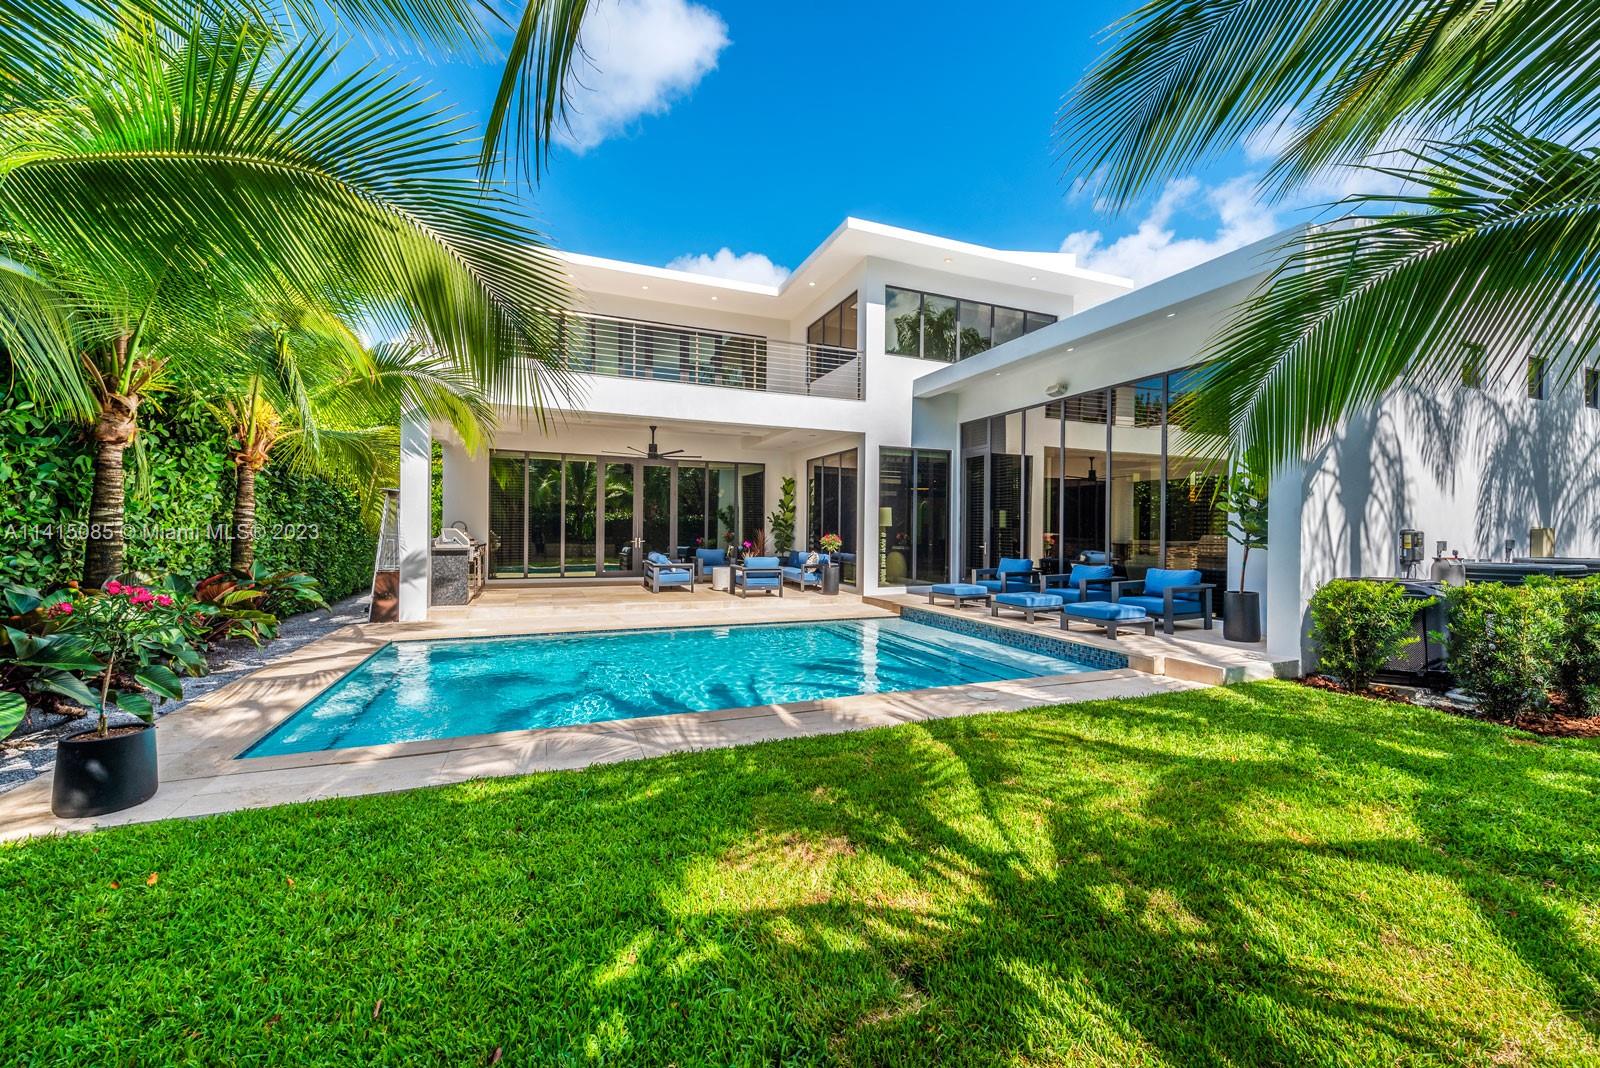 Exquisite, one-of-a-kind home on a quiet tree-lined street in coveted South Gables neighborhood. Designer finishes throughout this tropical modern masterpiece. Dramatic, light-filled living spaces feature walls of glass, 12’ ceilings, Italian stone flooring, Florense custom built-ins, wine storage & striking floating staircase. Experience the ultimate in indoor/outdoor living with an open floorplan that flows seamlessly. Stunning, European style kitchen w Fisher & Paykal appliances and opens to expansive family room. Ultra-private primary suite has spa-like bath with glass enclosed shower & overlooks balcony. State-of-the art Smart Home features + 1 Car Gar. (w/lift). Idyllic outdoor spaces offer a summer kitchen & heated pool overlooking a lush tropical garden.